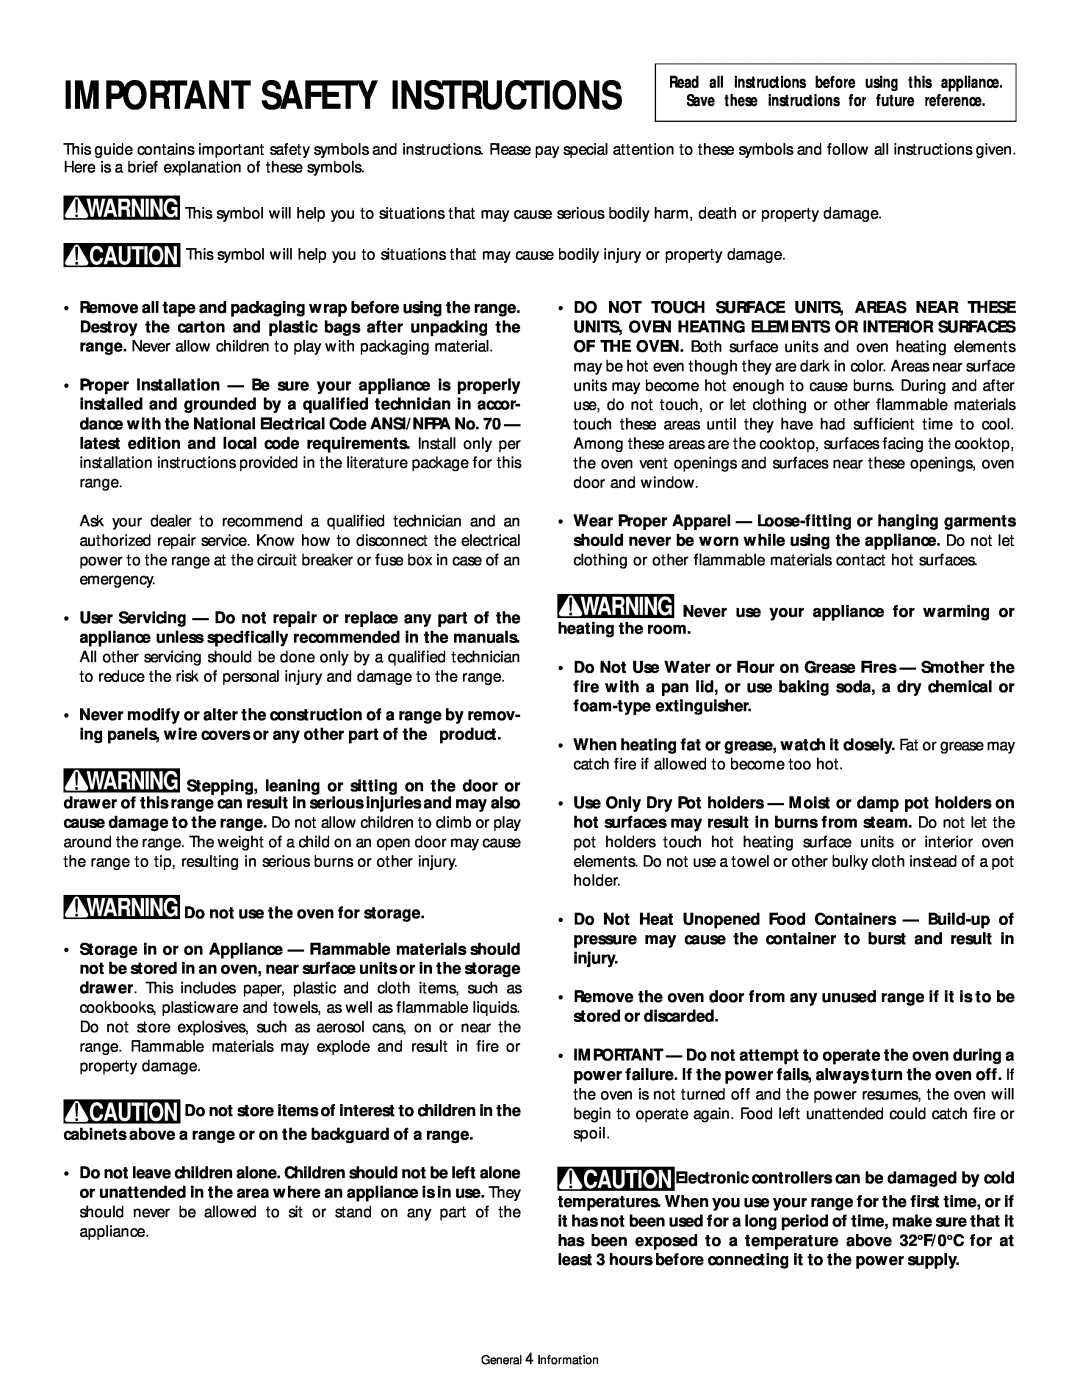 Frigidaire 318200407 manual Important Safety Instructions, Read all instructions before using this appliance 